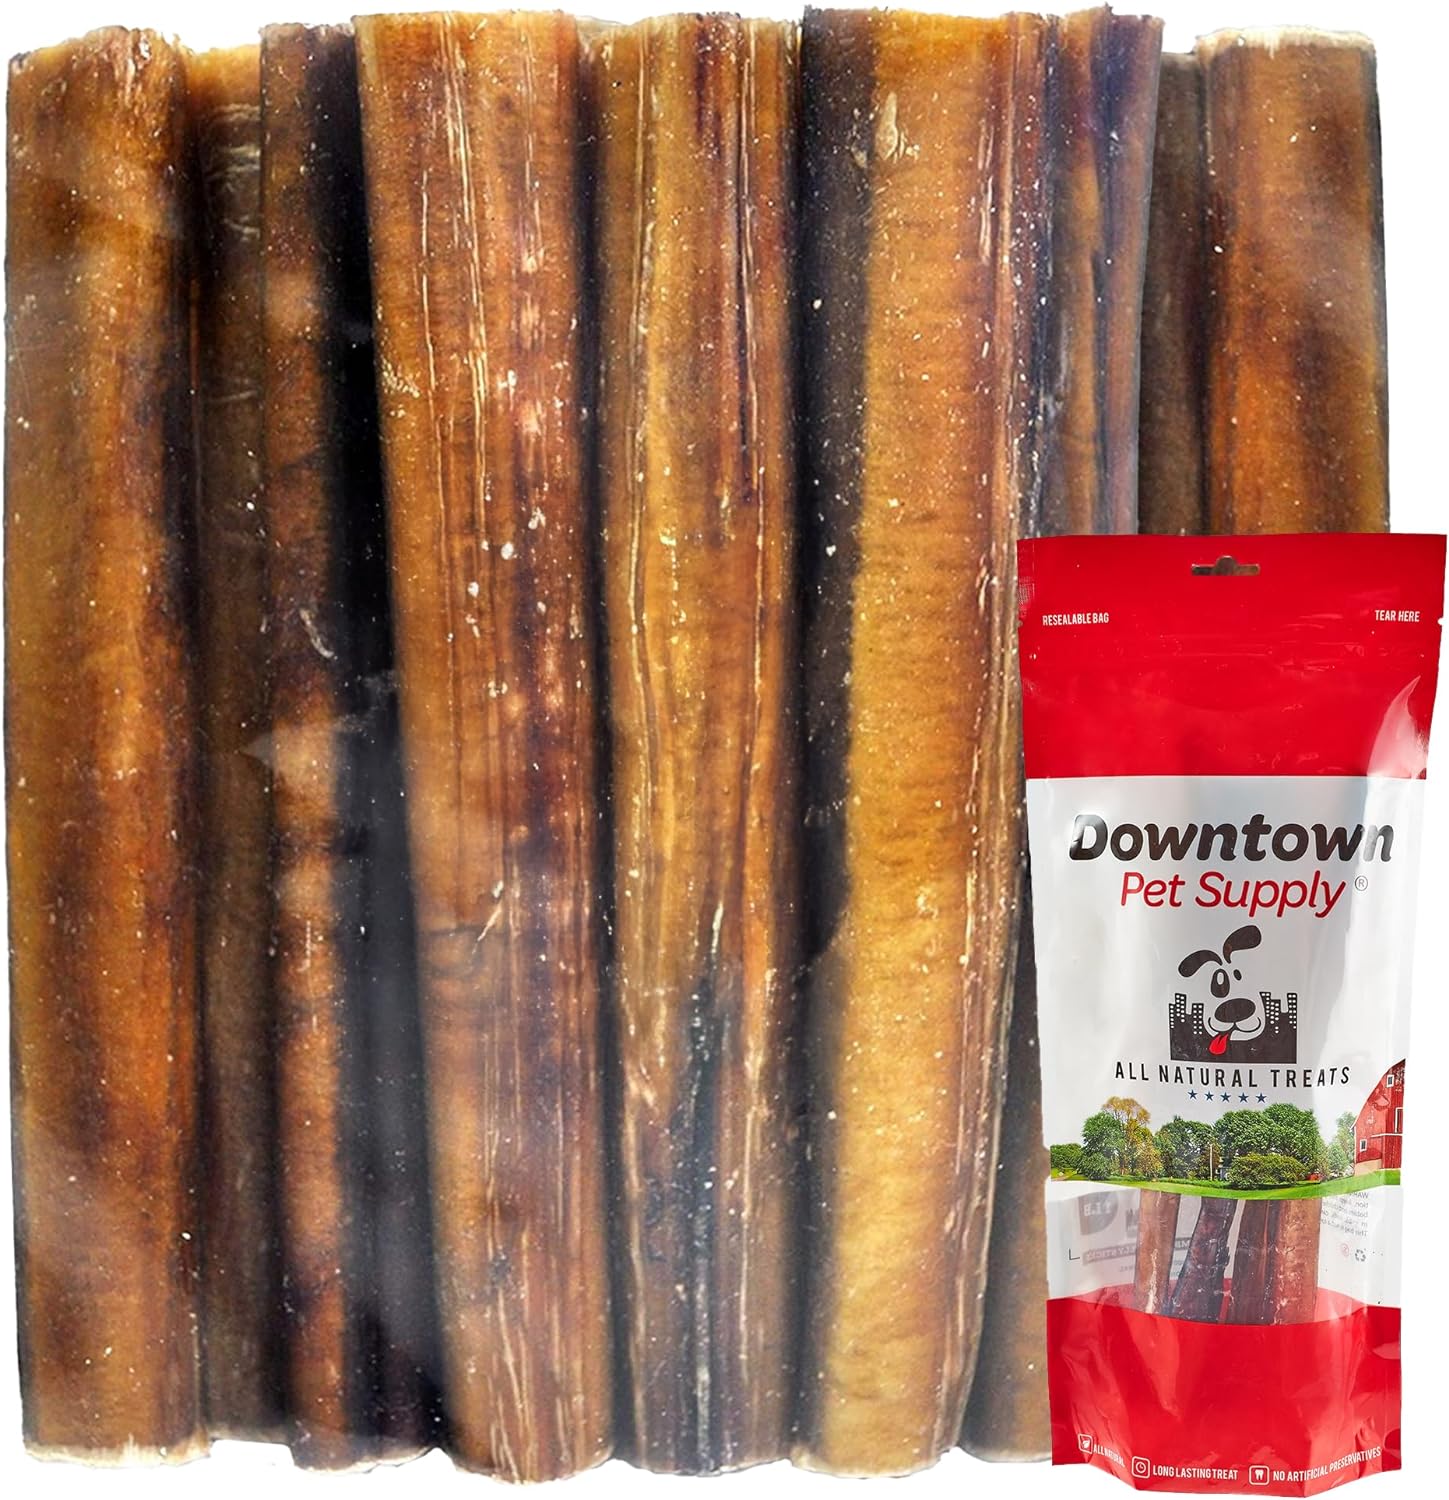 Downtown Pet Supply Bully Sticks for Dogs (12", 5-Pack, Jumbo) Non-GMO, Grain Free, Rawhide Free Dog Chews Long Lasting Pizzle Sticks - Low Odor Bully Sticks for Large Dogs